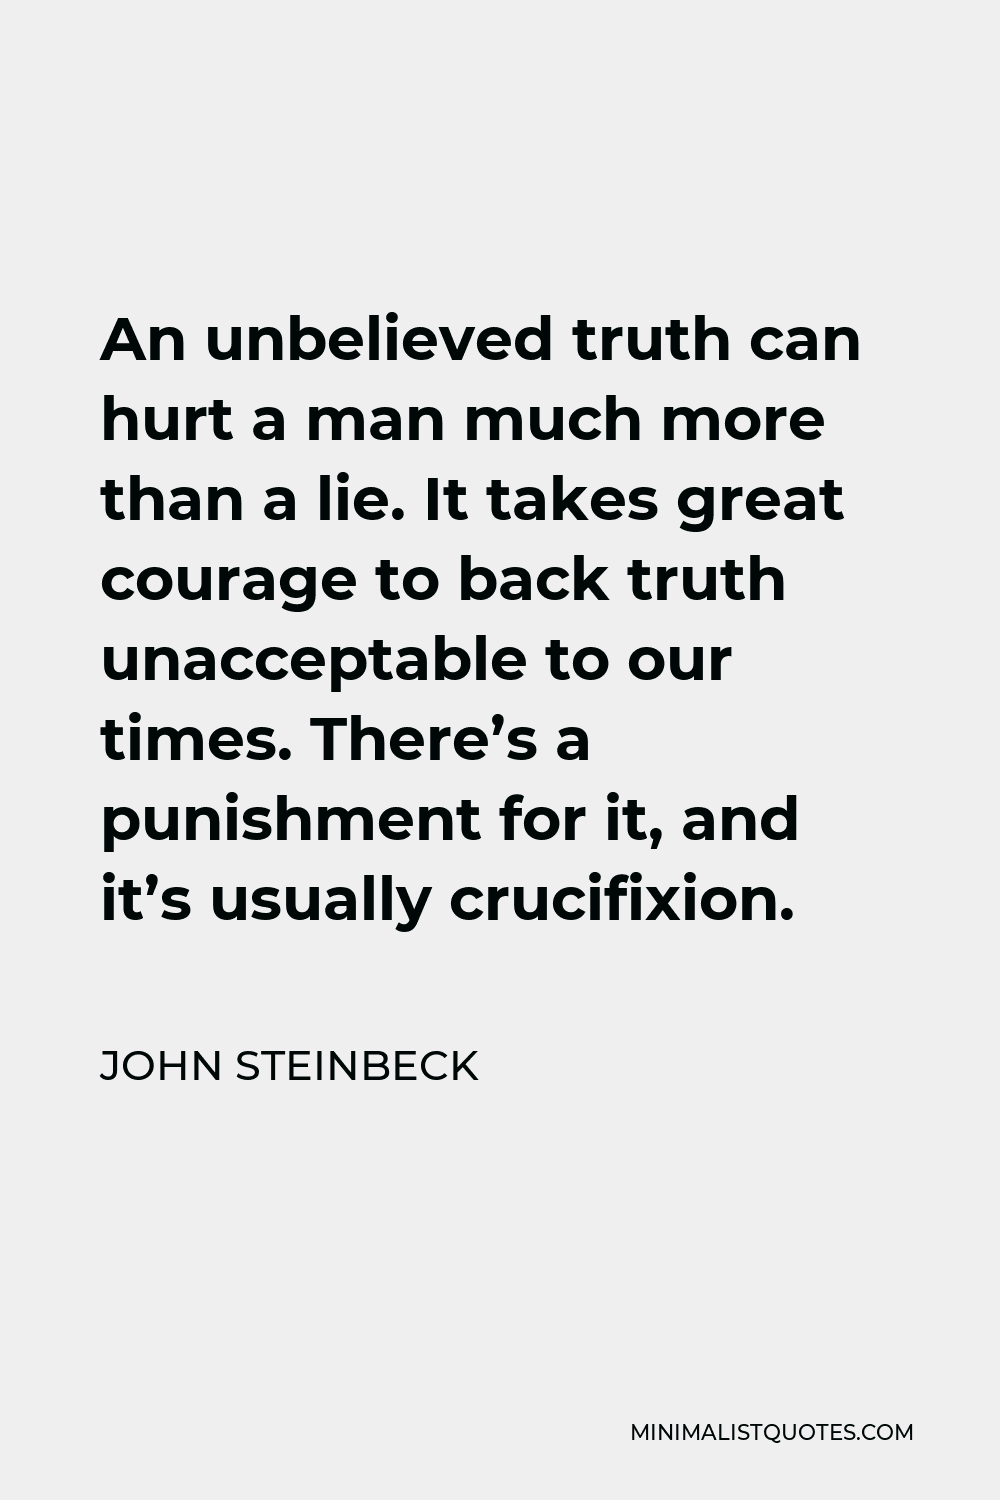 John Steinbeck Quote - An unbelieved truth can hurt a man much more than a lie. It takes great courage to back truth unacceptable to our times. There’s a punishment for it, and it’s usually crucifixion.